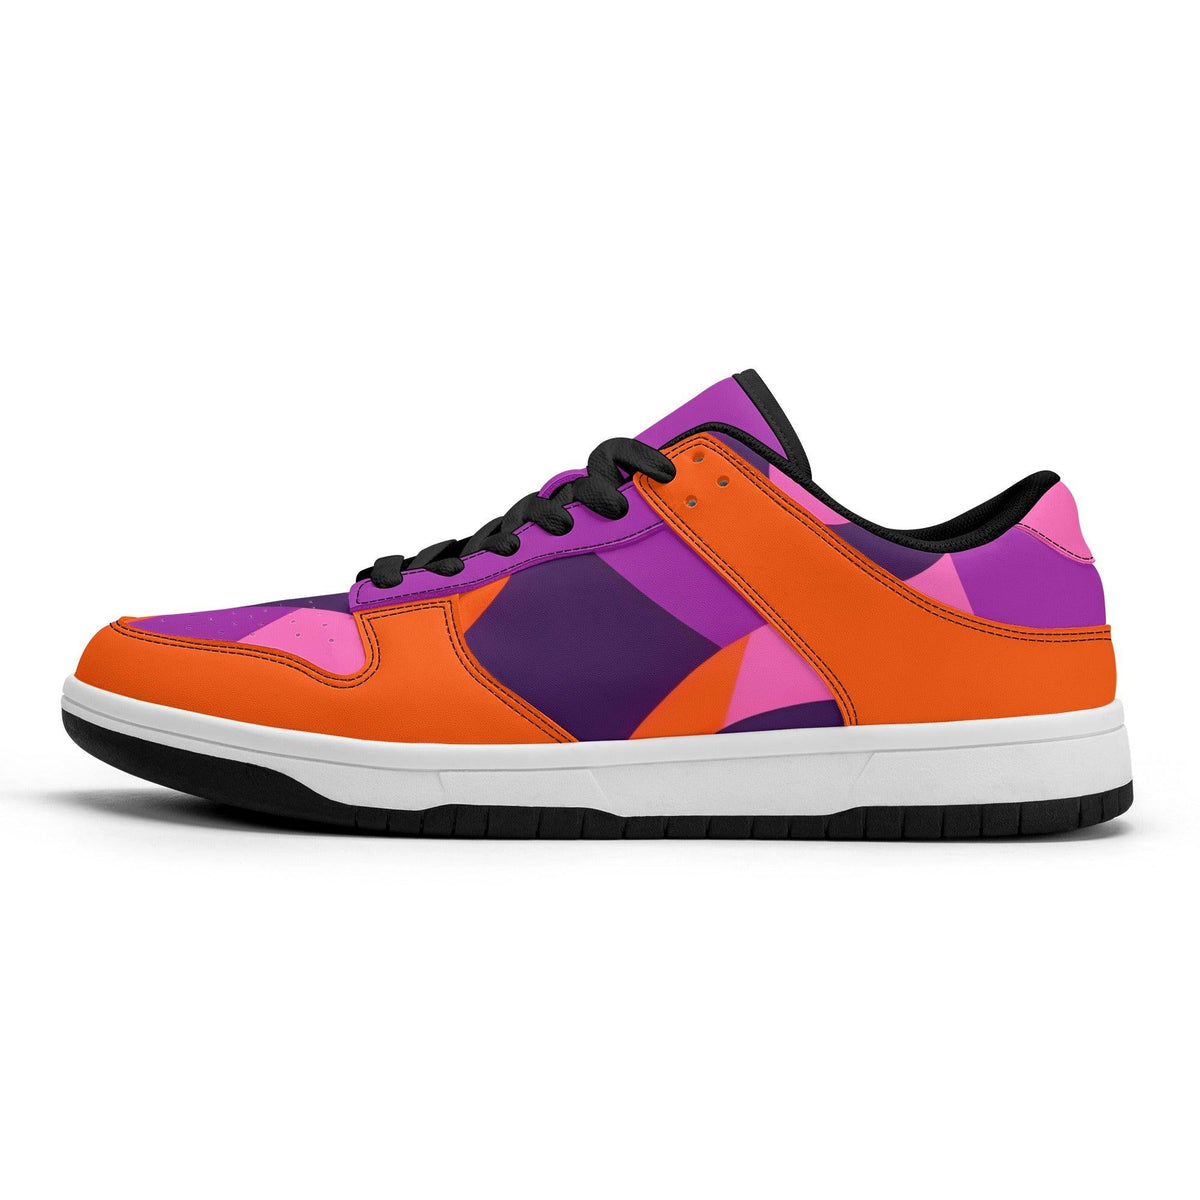 Airline Series Tokyo 239 Low Top Mixed Media Sneakers - Retro Bold Violet Orange Yellow Abstract Funky Vibrant Black Lace Multicolor Blissfully Brand Women's Shoes